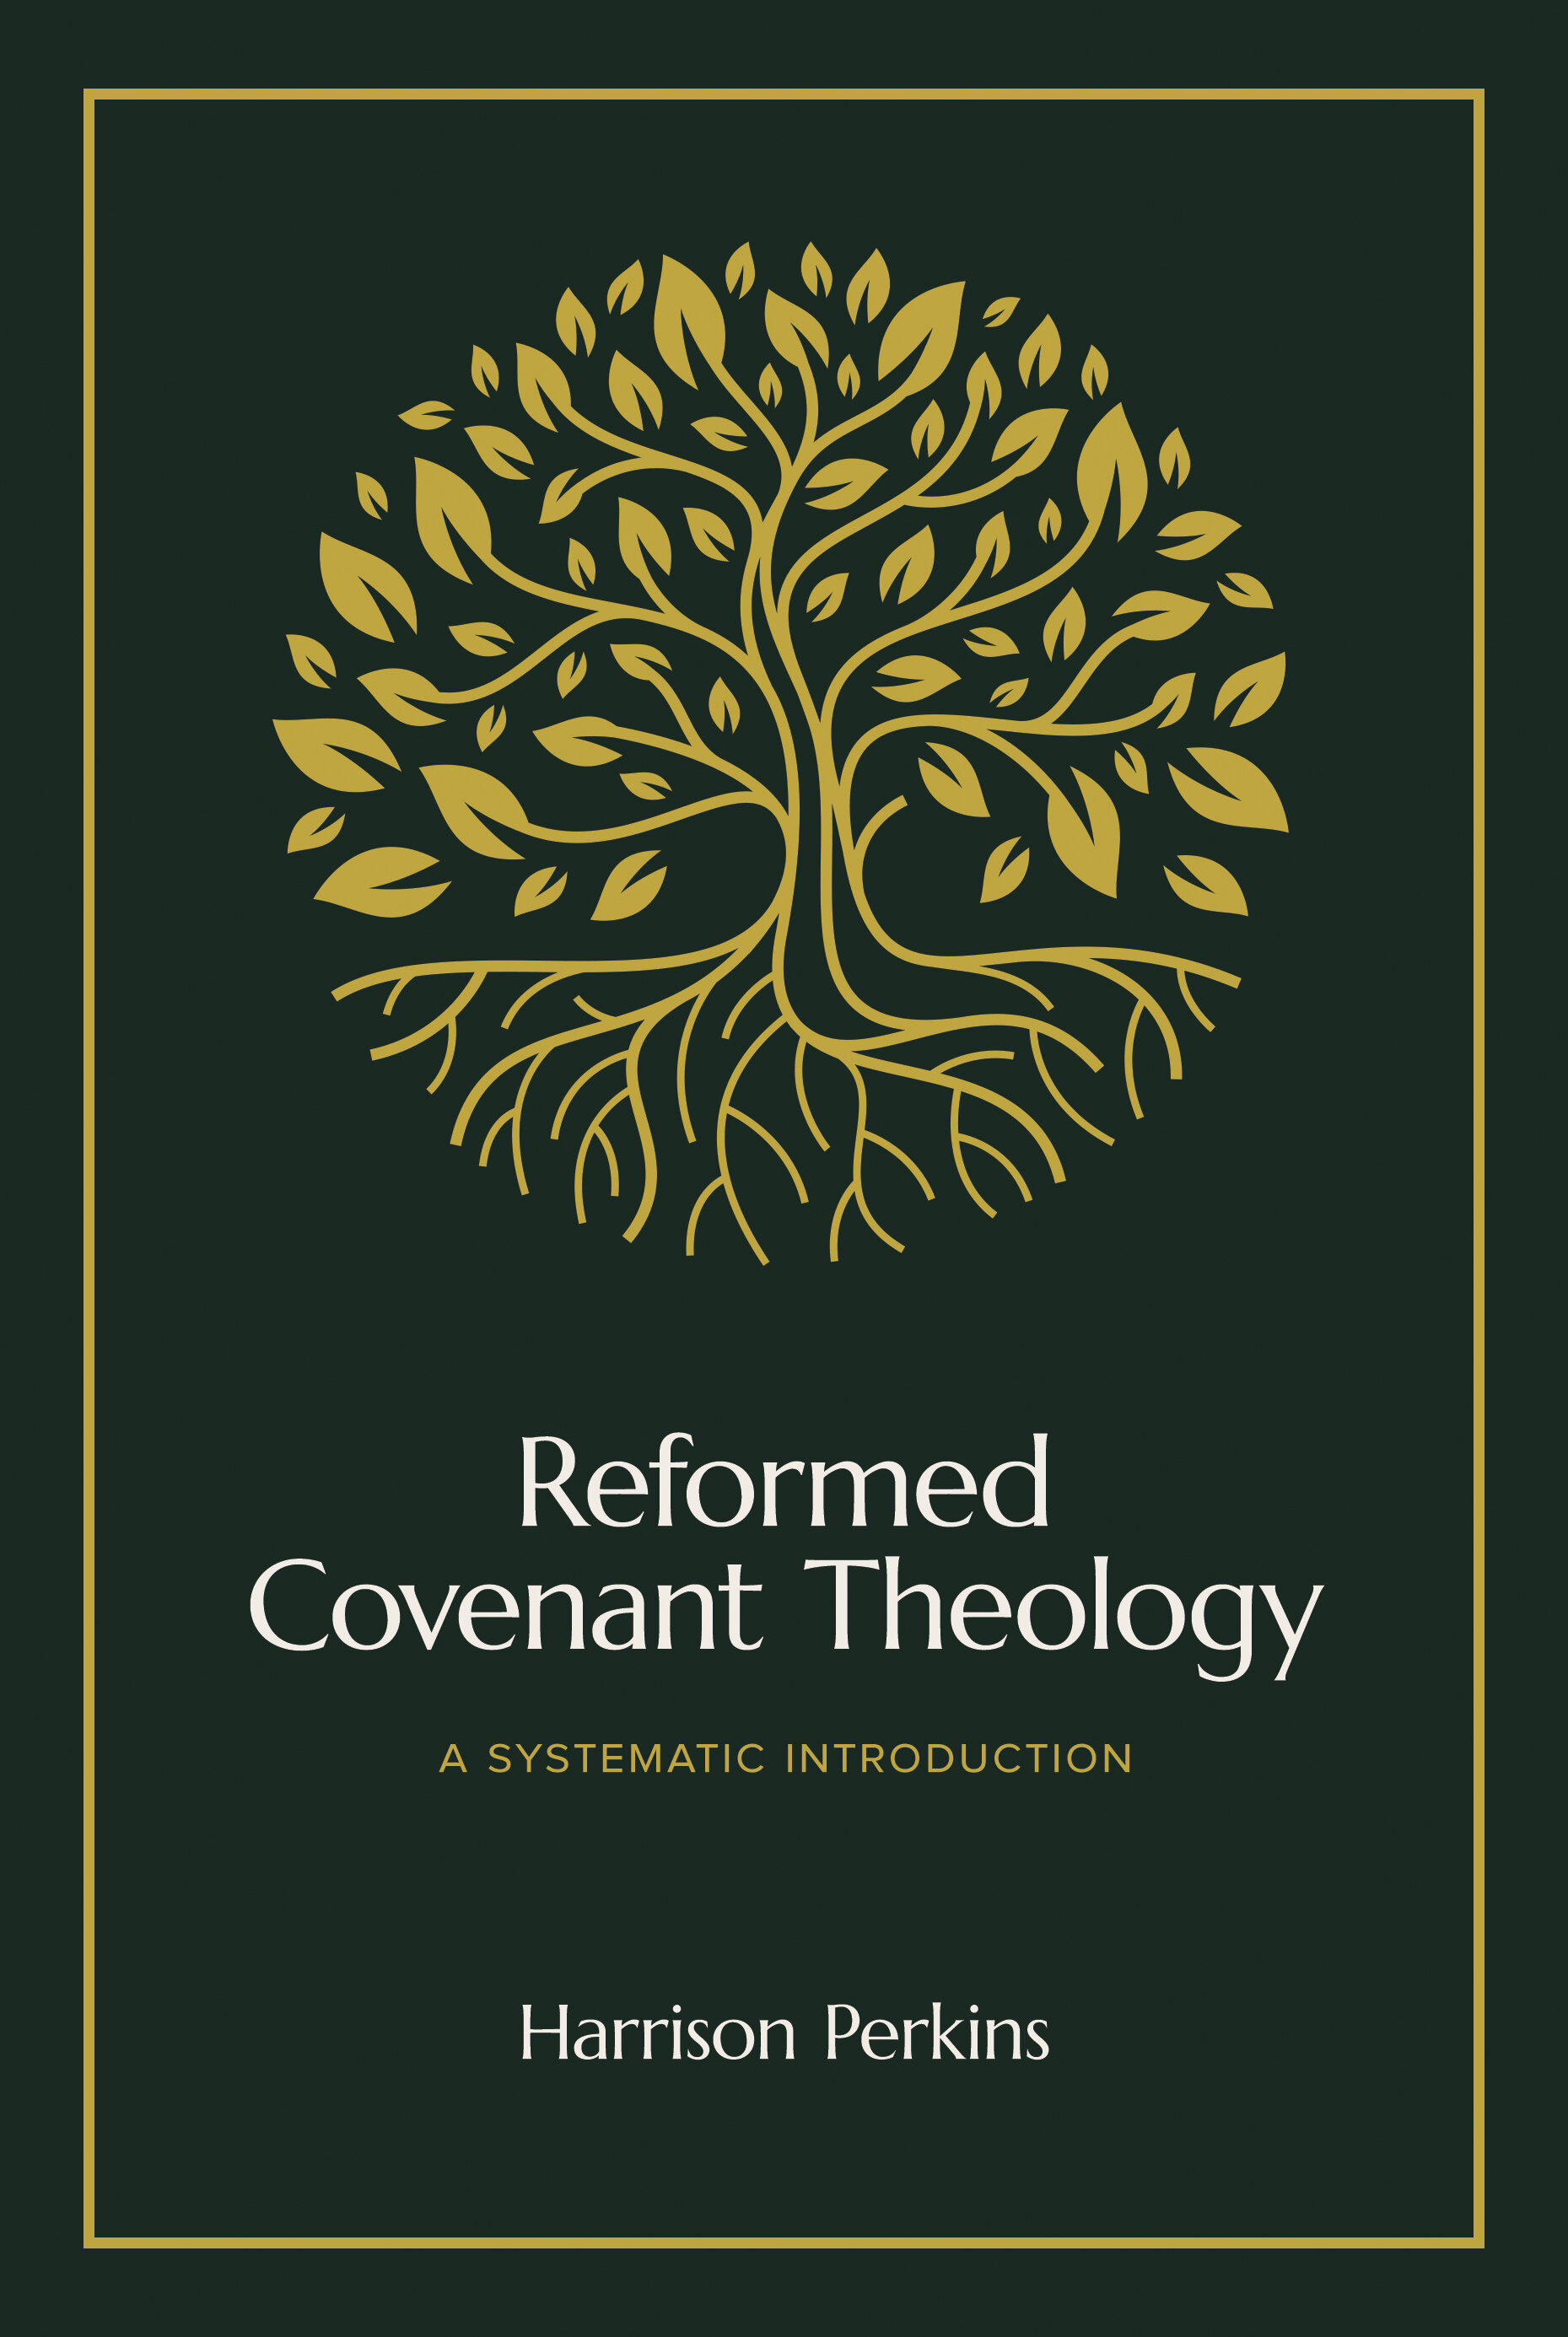 Reformed Covenant Theology: A Systematic Introduction